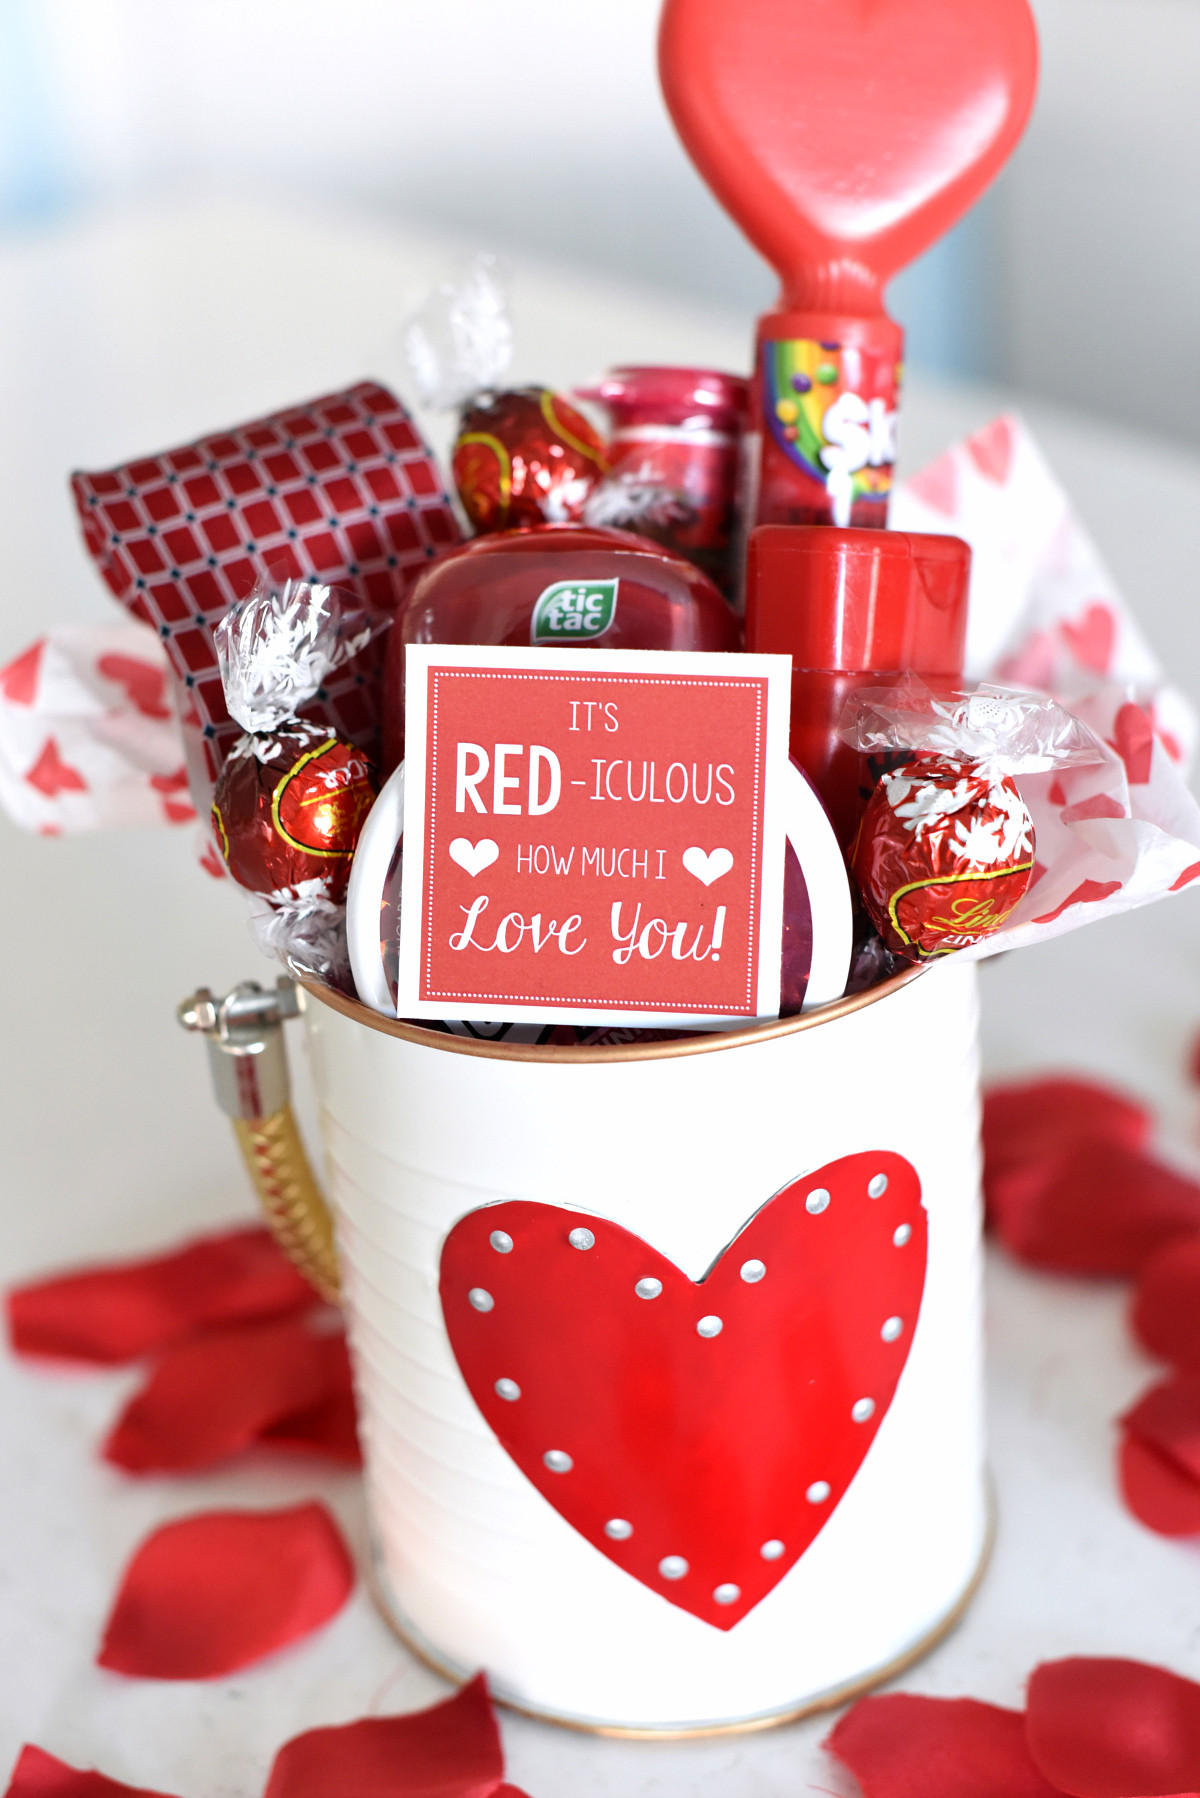 Valentine Gift For Husband Ideas
 Cute Valentine s Day Gift Idea RED iculous Basket